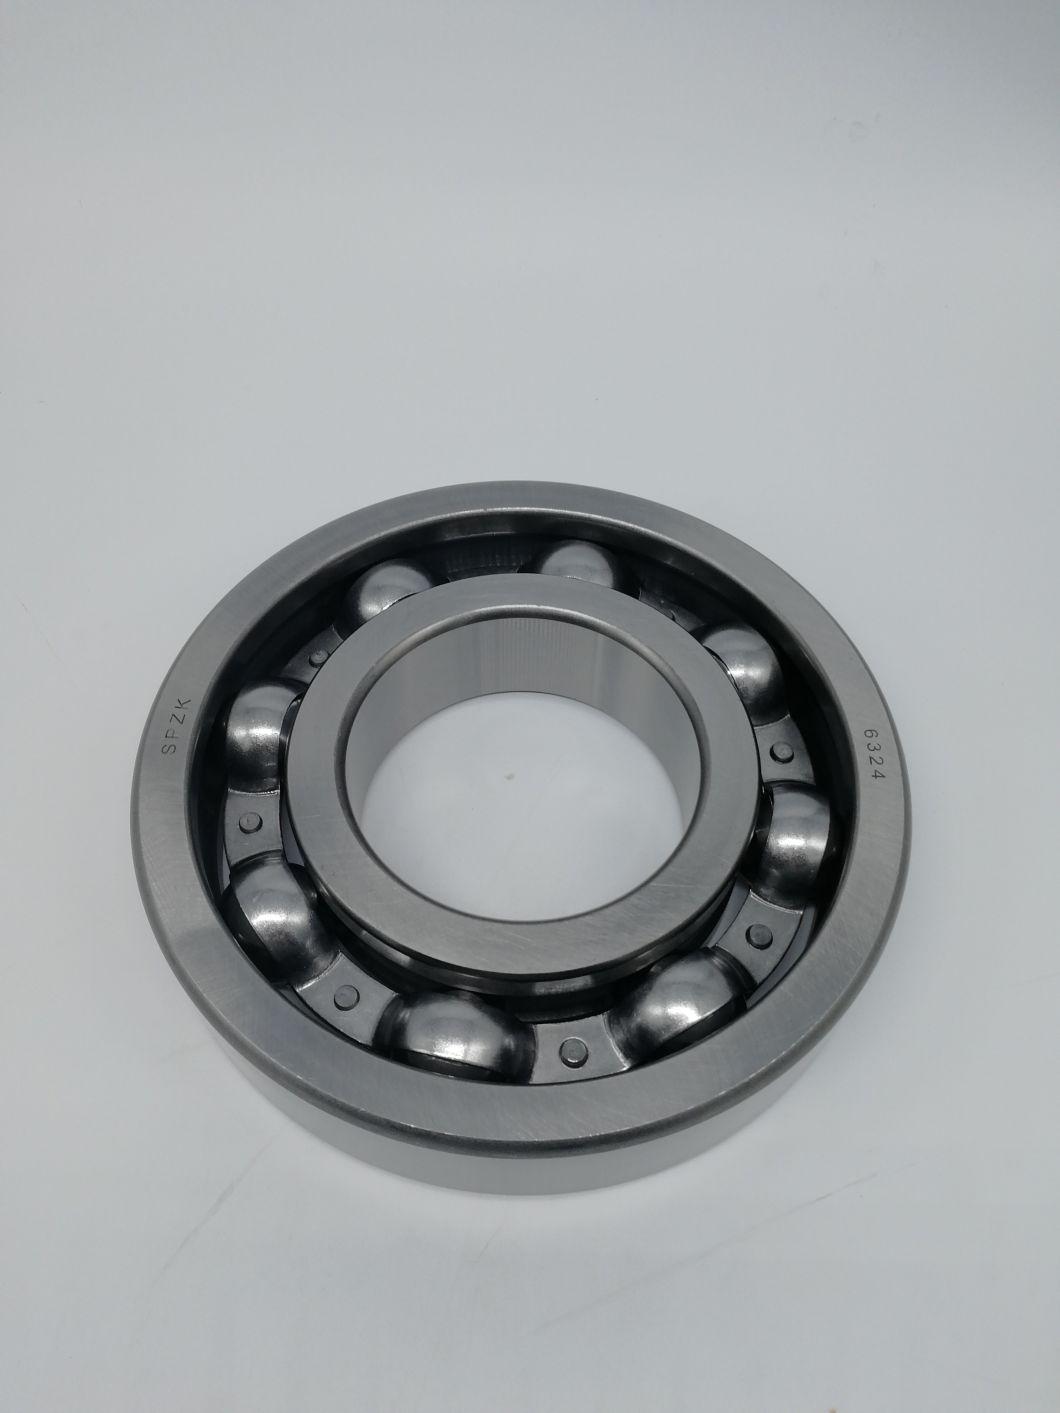 Hardware Accessories Rolling Ball Bearing 6324-P6 (16024 6024 6224 6324 6826 6926 16026 6318 6319 6320 6321 6322 6324 628/4 628/5 628/6 628/Zz 2R)